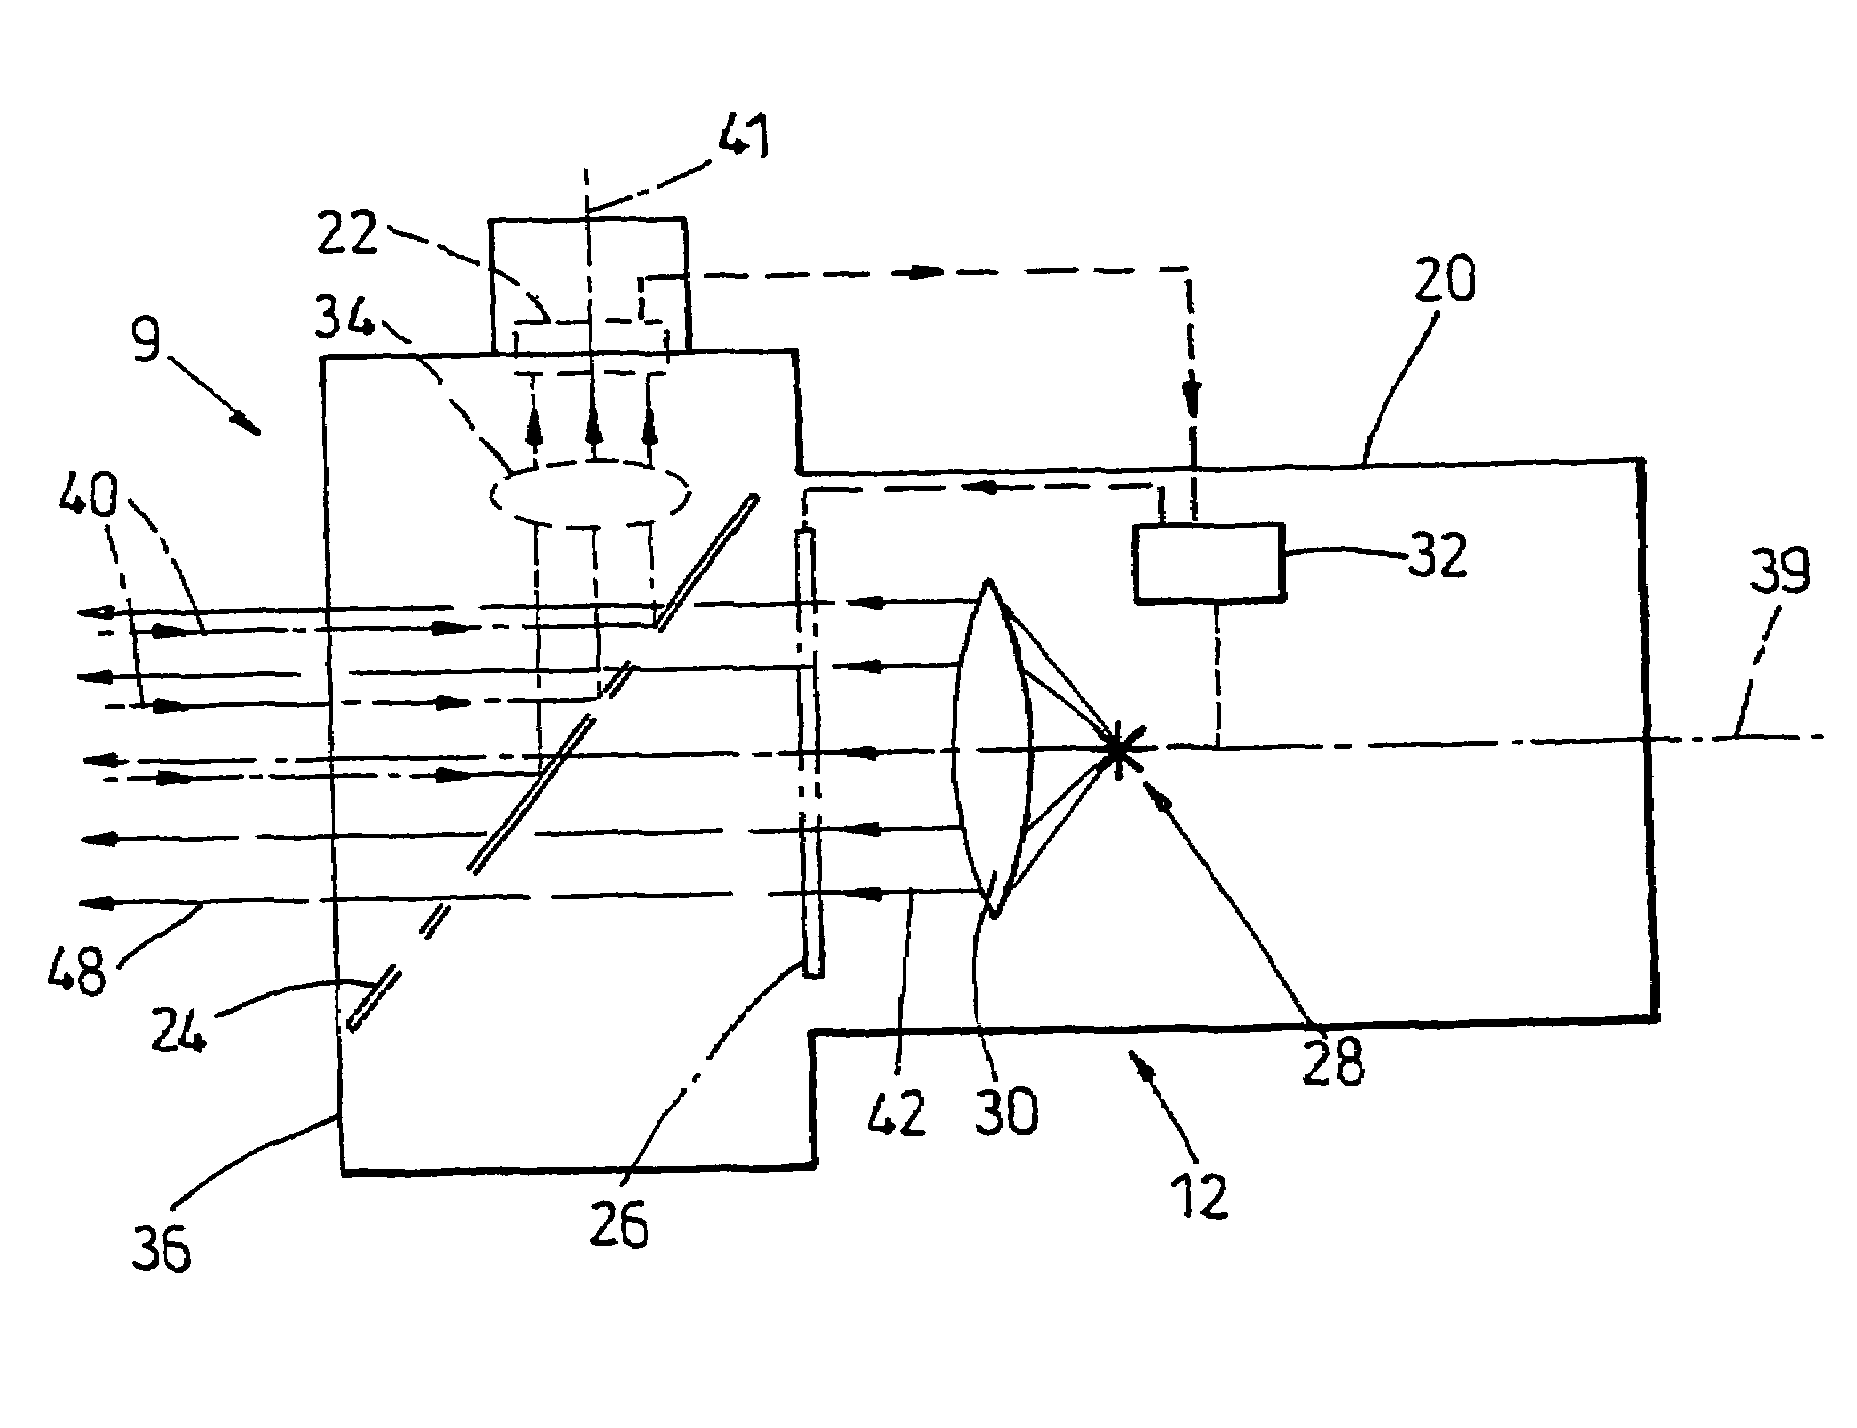 Illumination and imaging devices and methods